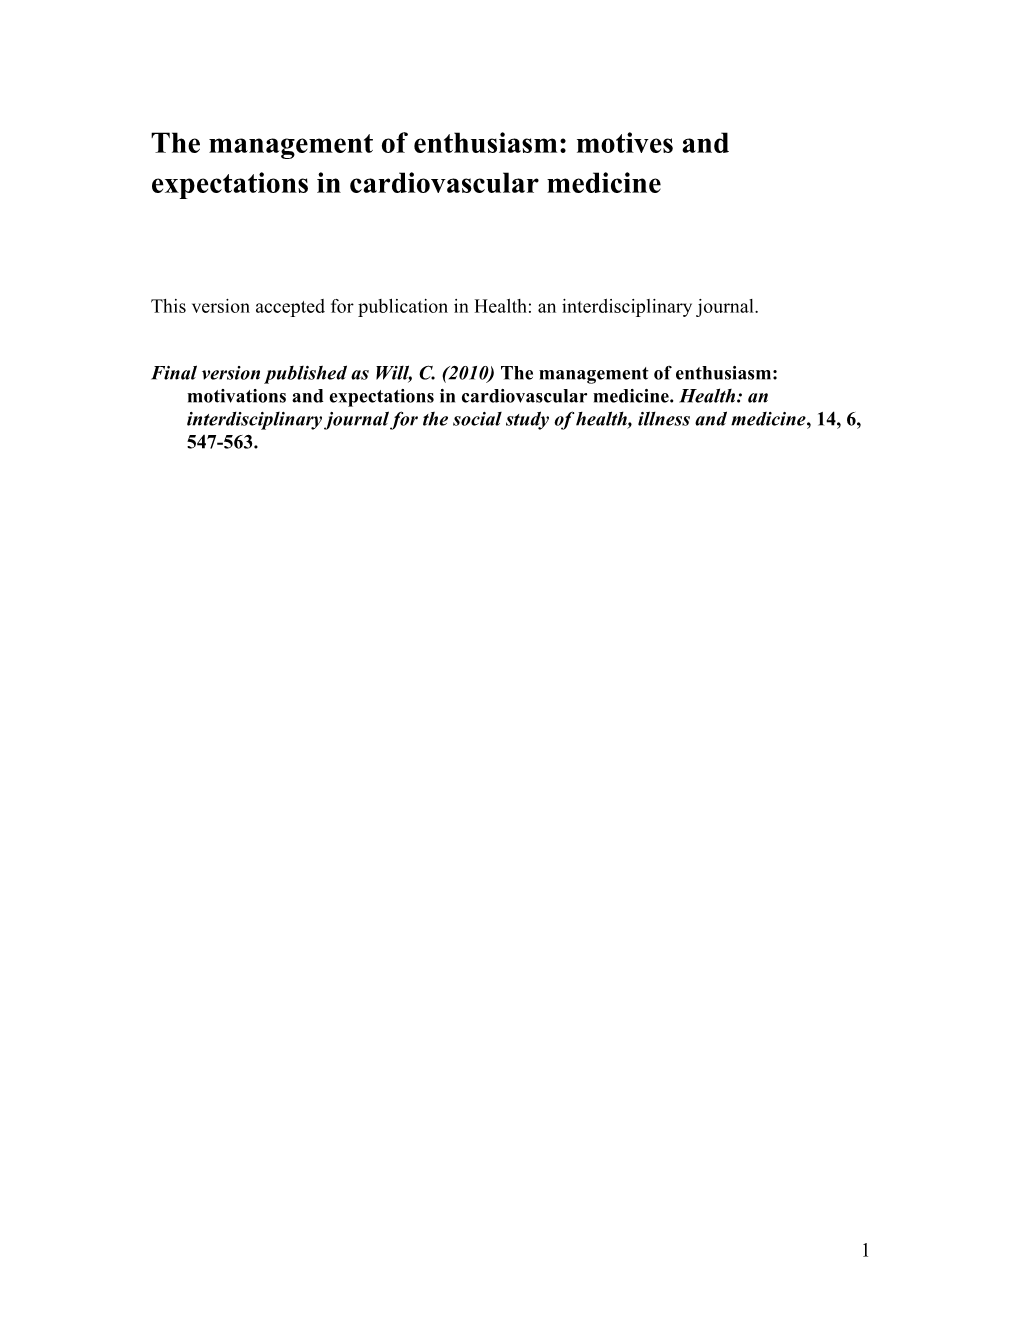 The Management of Enthusiasm: Motives and Expectations in Cardiovascular Medicine